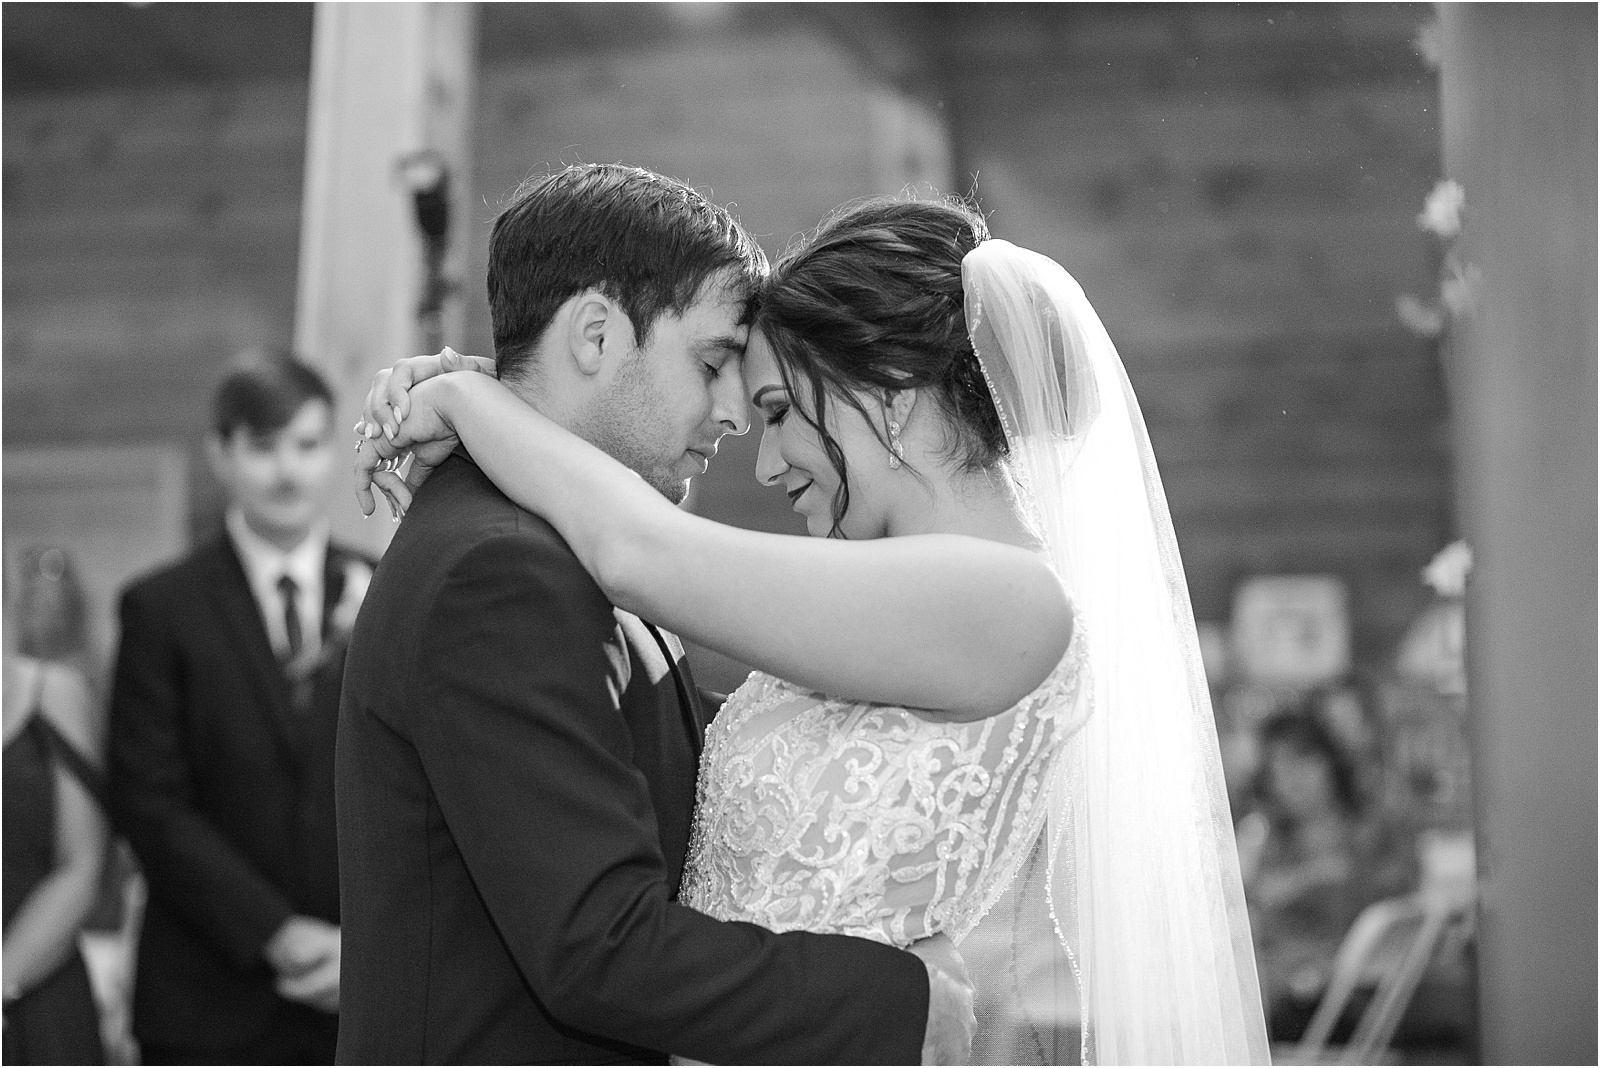 Bride and groom dance forehead to forehead during first dance after wedding